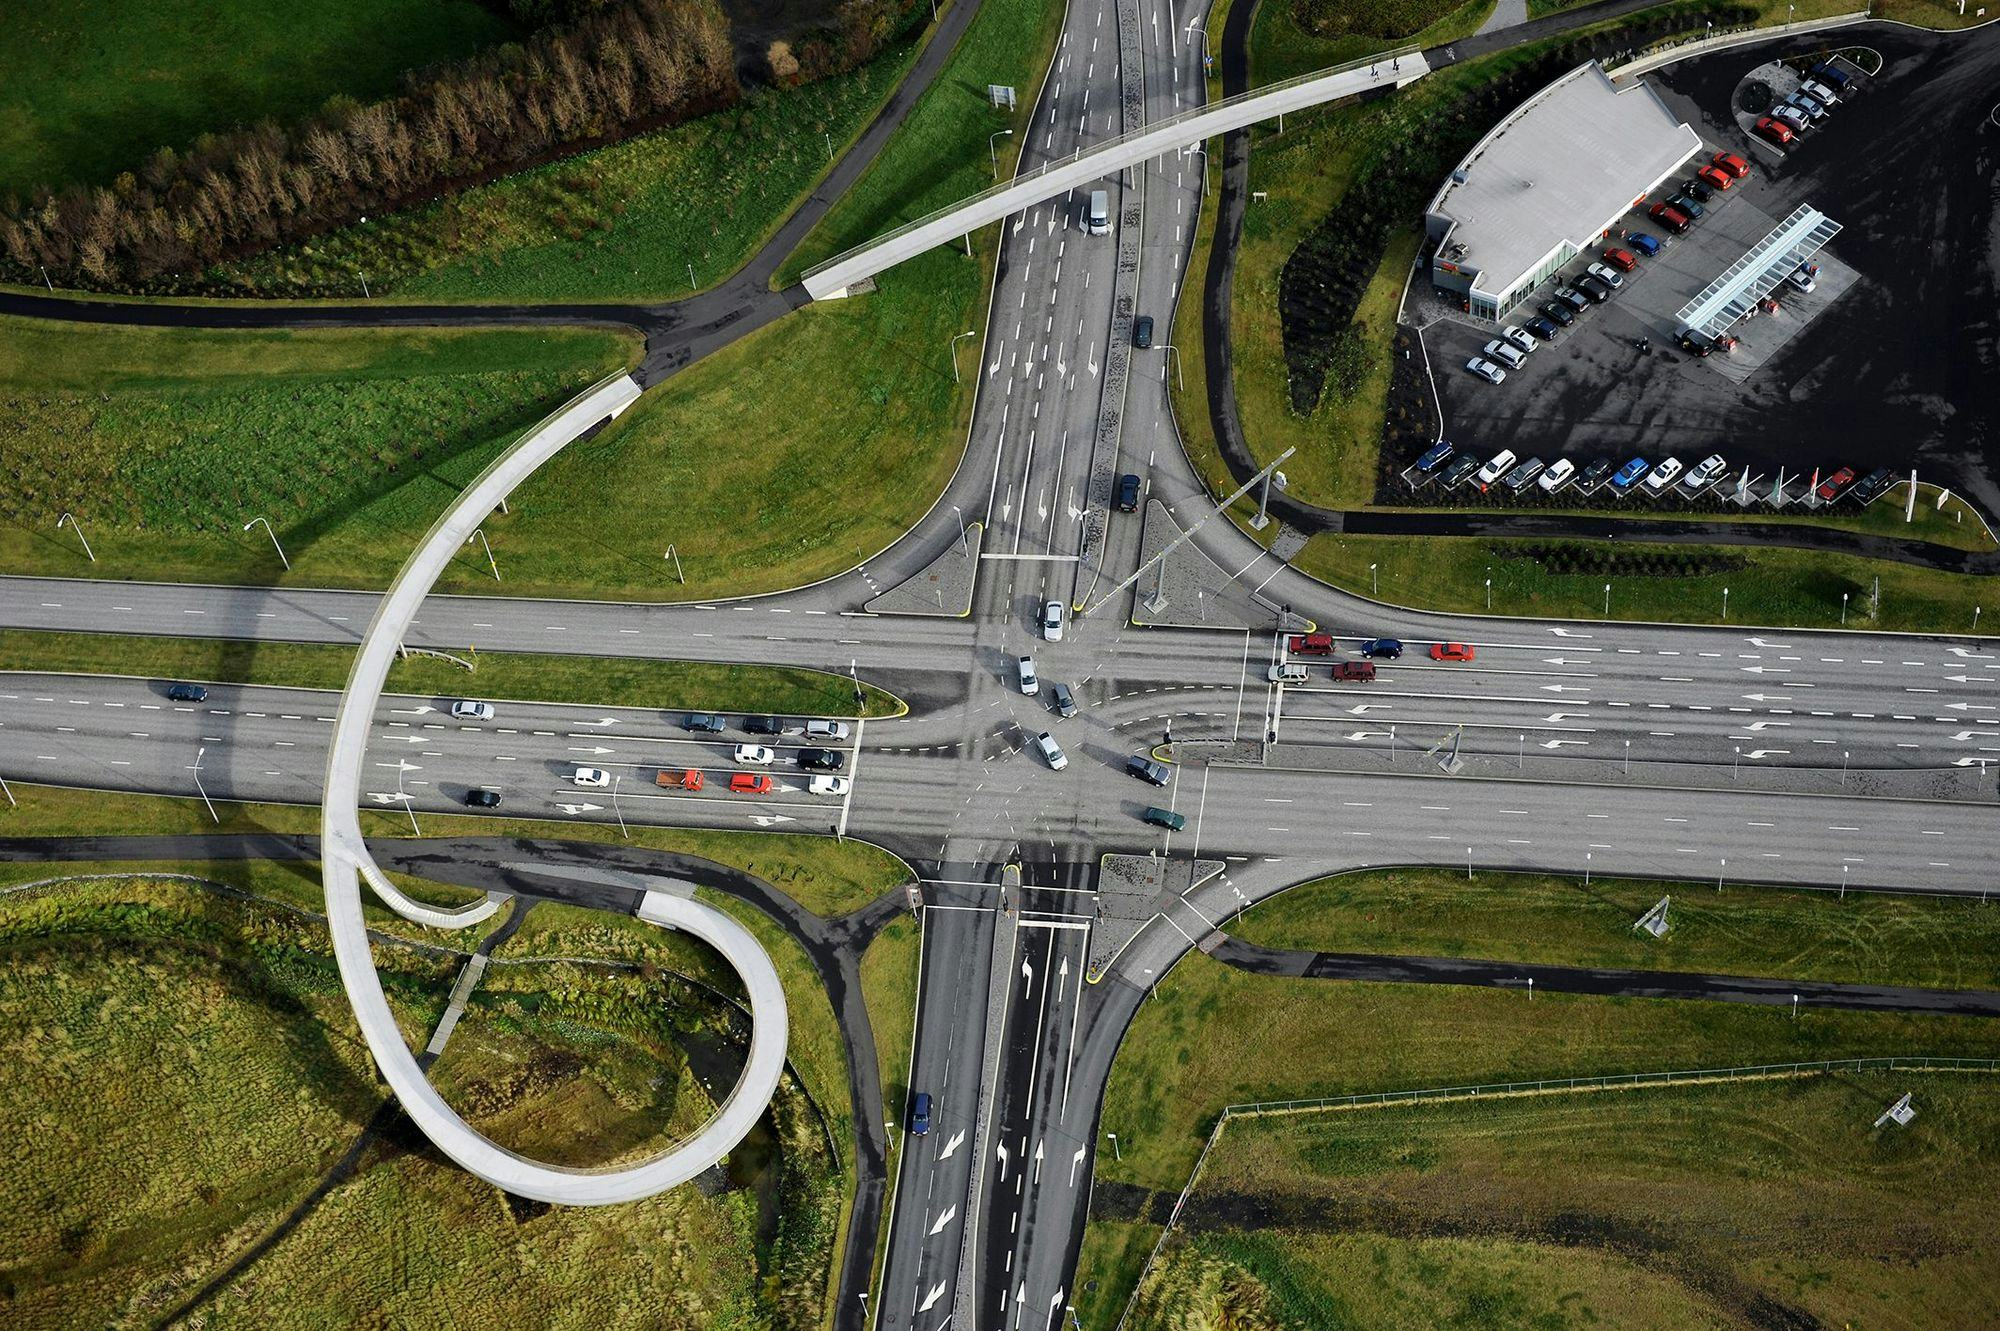 A central intersection is visible from the air and down, we look down on traffic streets that cross, a pedestrian bridge crosses the street on one side, cars on the streets and houses on the other side of the street.